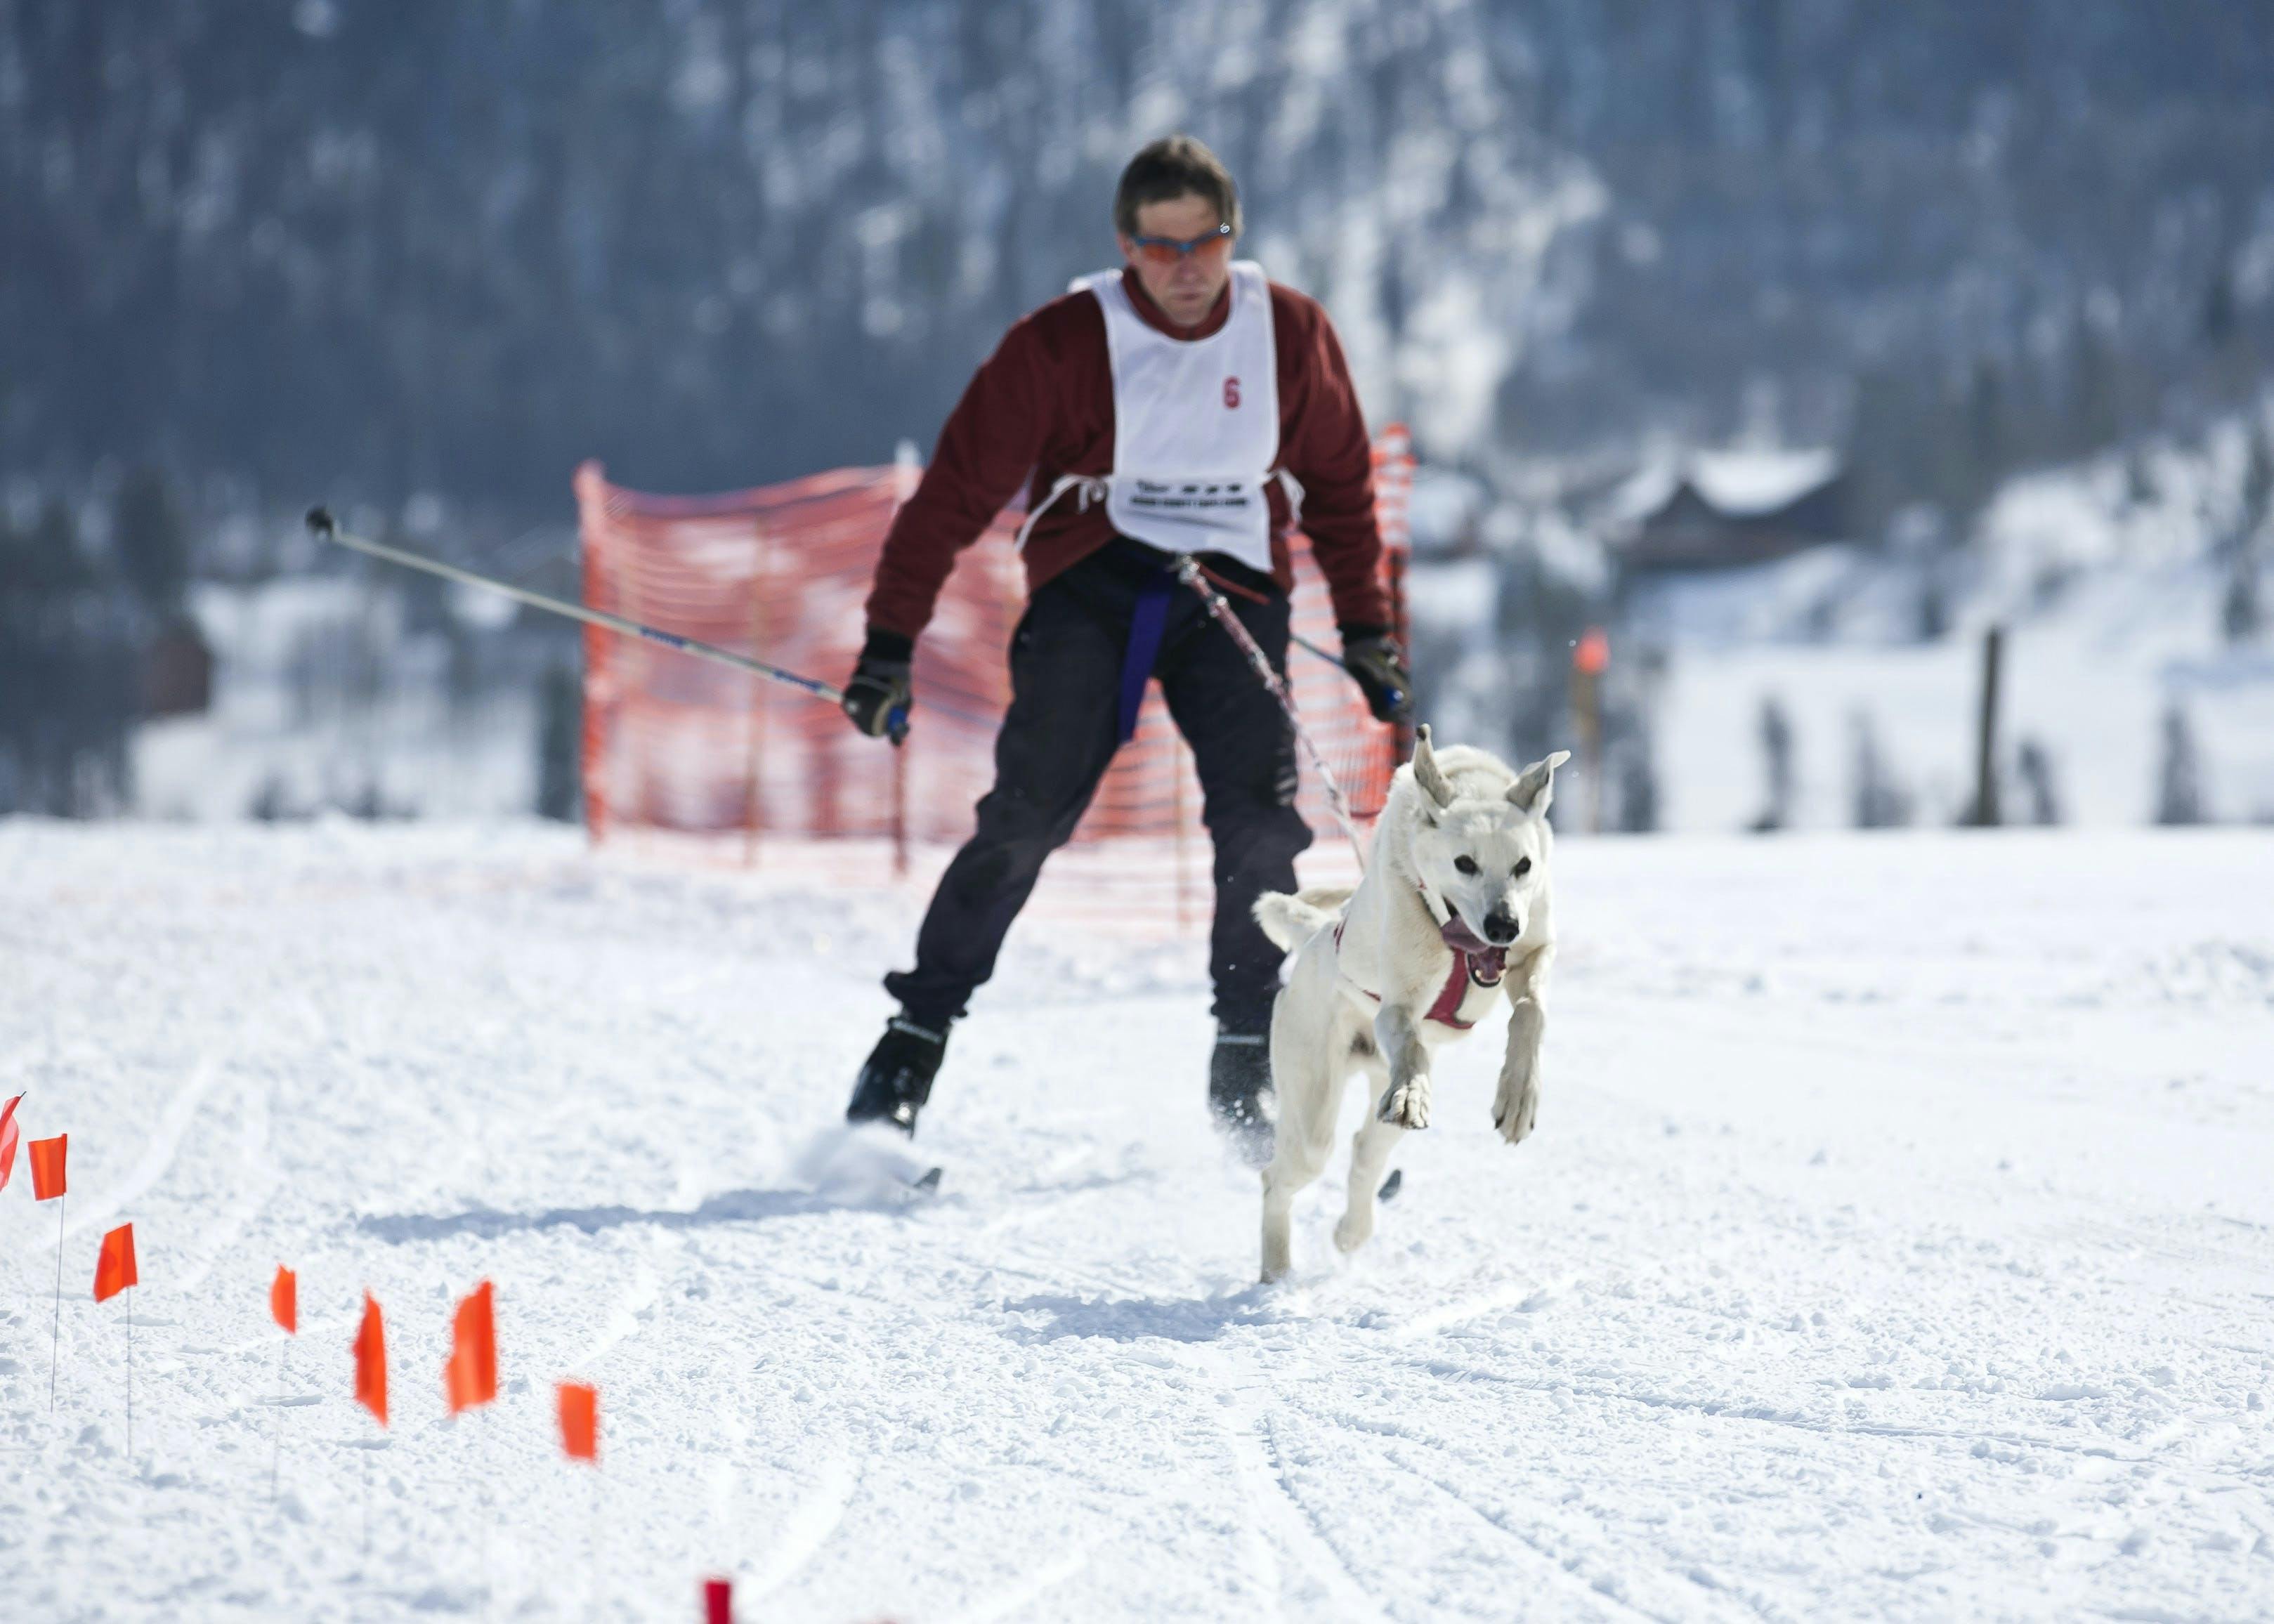 Skijoring with dog on cross-country skis